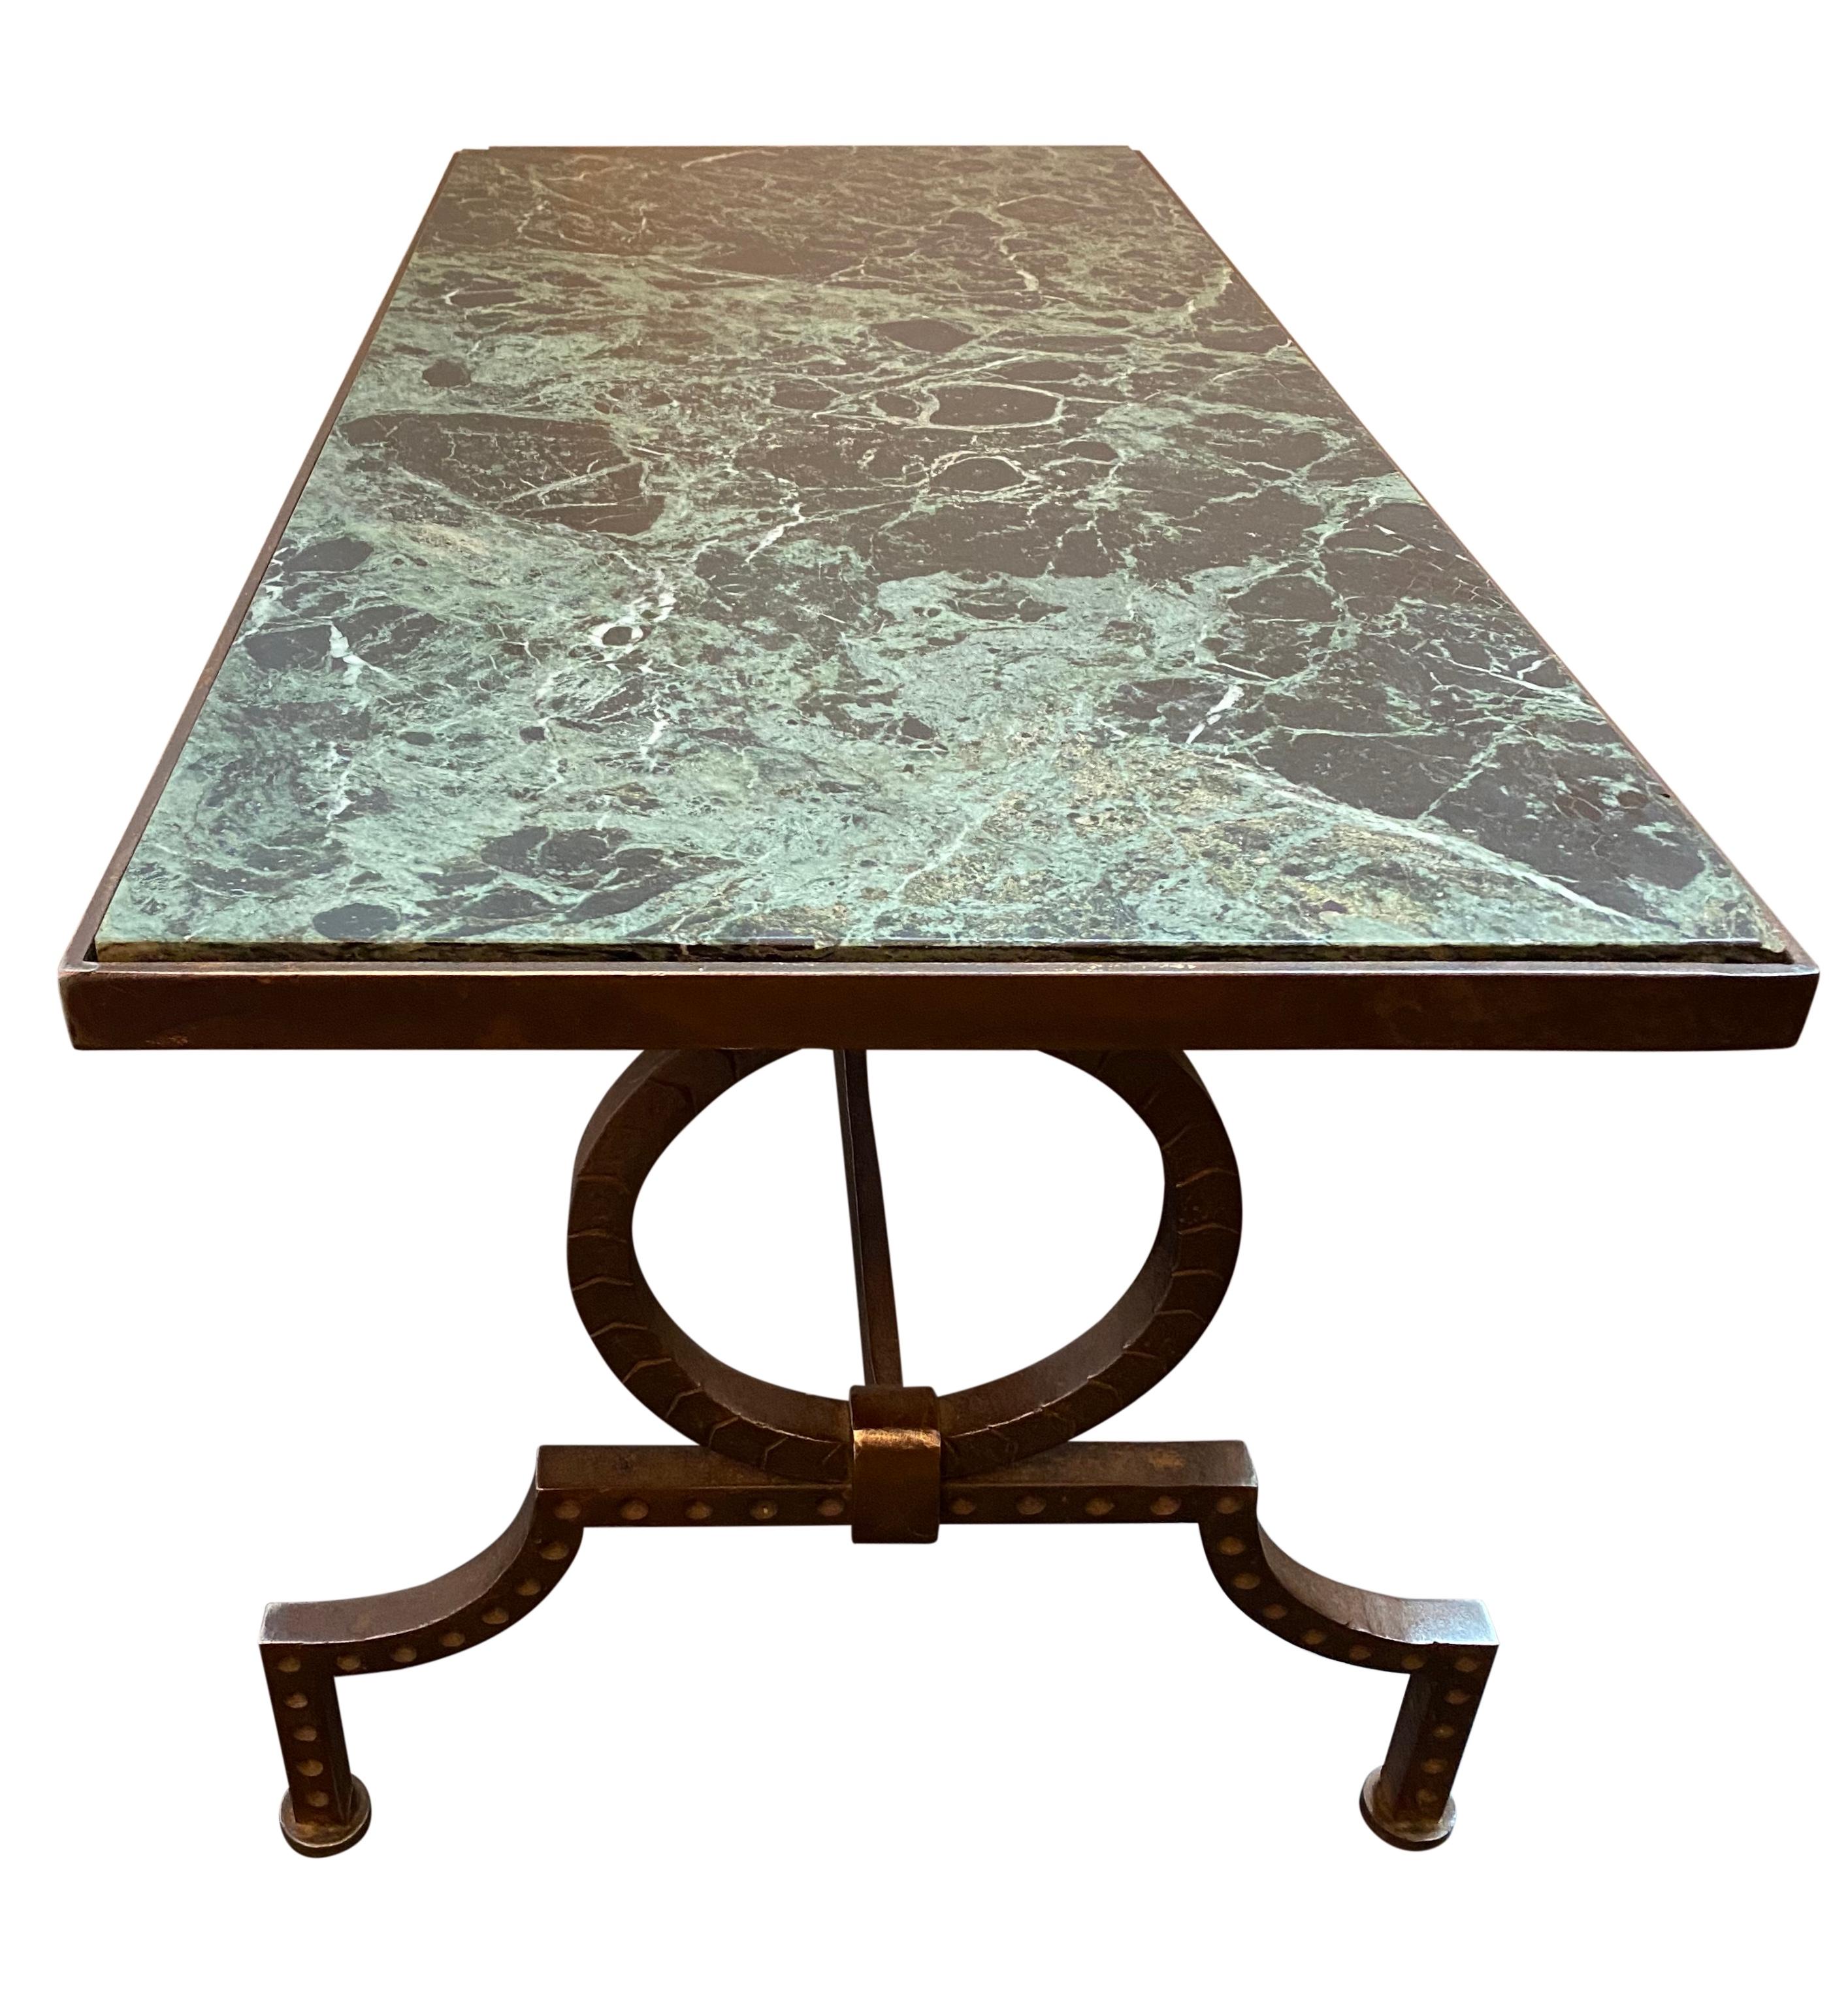 Gilbert Poillerat coffee table with hand hammered wrought iron base and original green marble top.

Editorial - Gilbert Poillerat (Maître Ferronnier) Text: Francois Bandot (p.240), Preface Karl Legerfeld.

